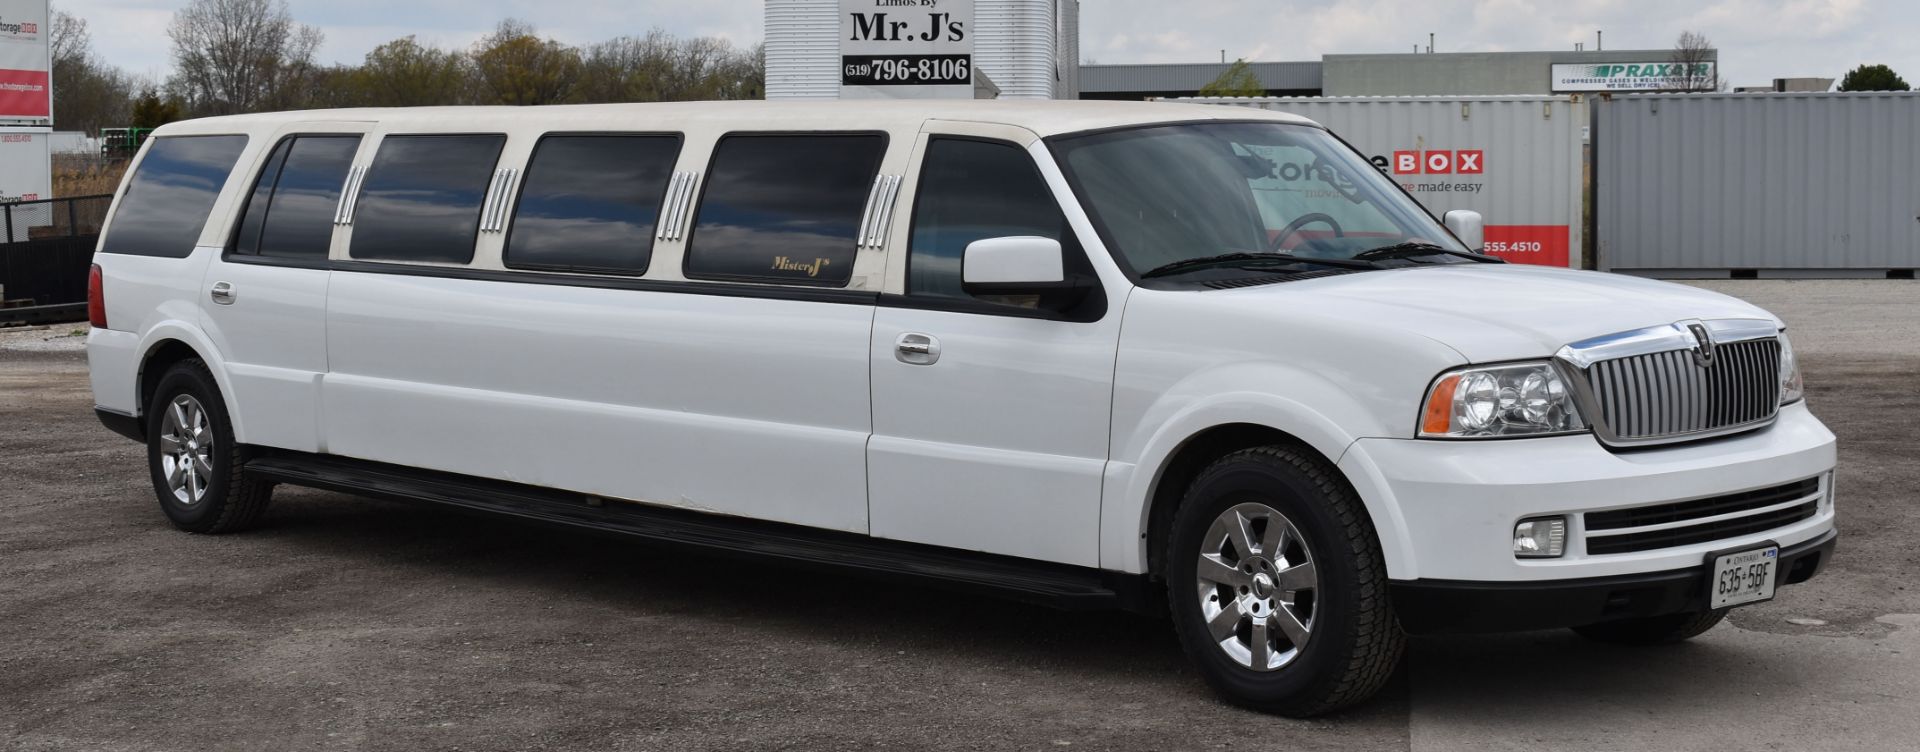 LINCOLN (2006) NAVIGATOR 14 PASSENGER STRETCH LIMOUSINE WITH 8 CYLINDER 5.4L GAS ENGINE, 219, - Image 3 of 21